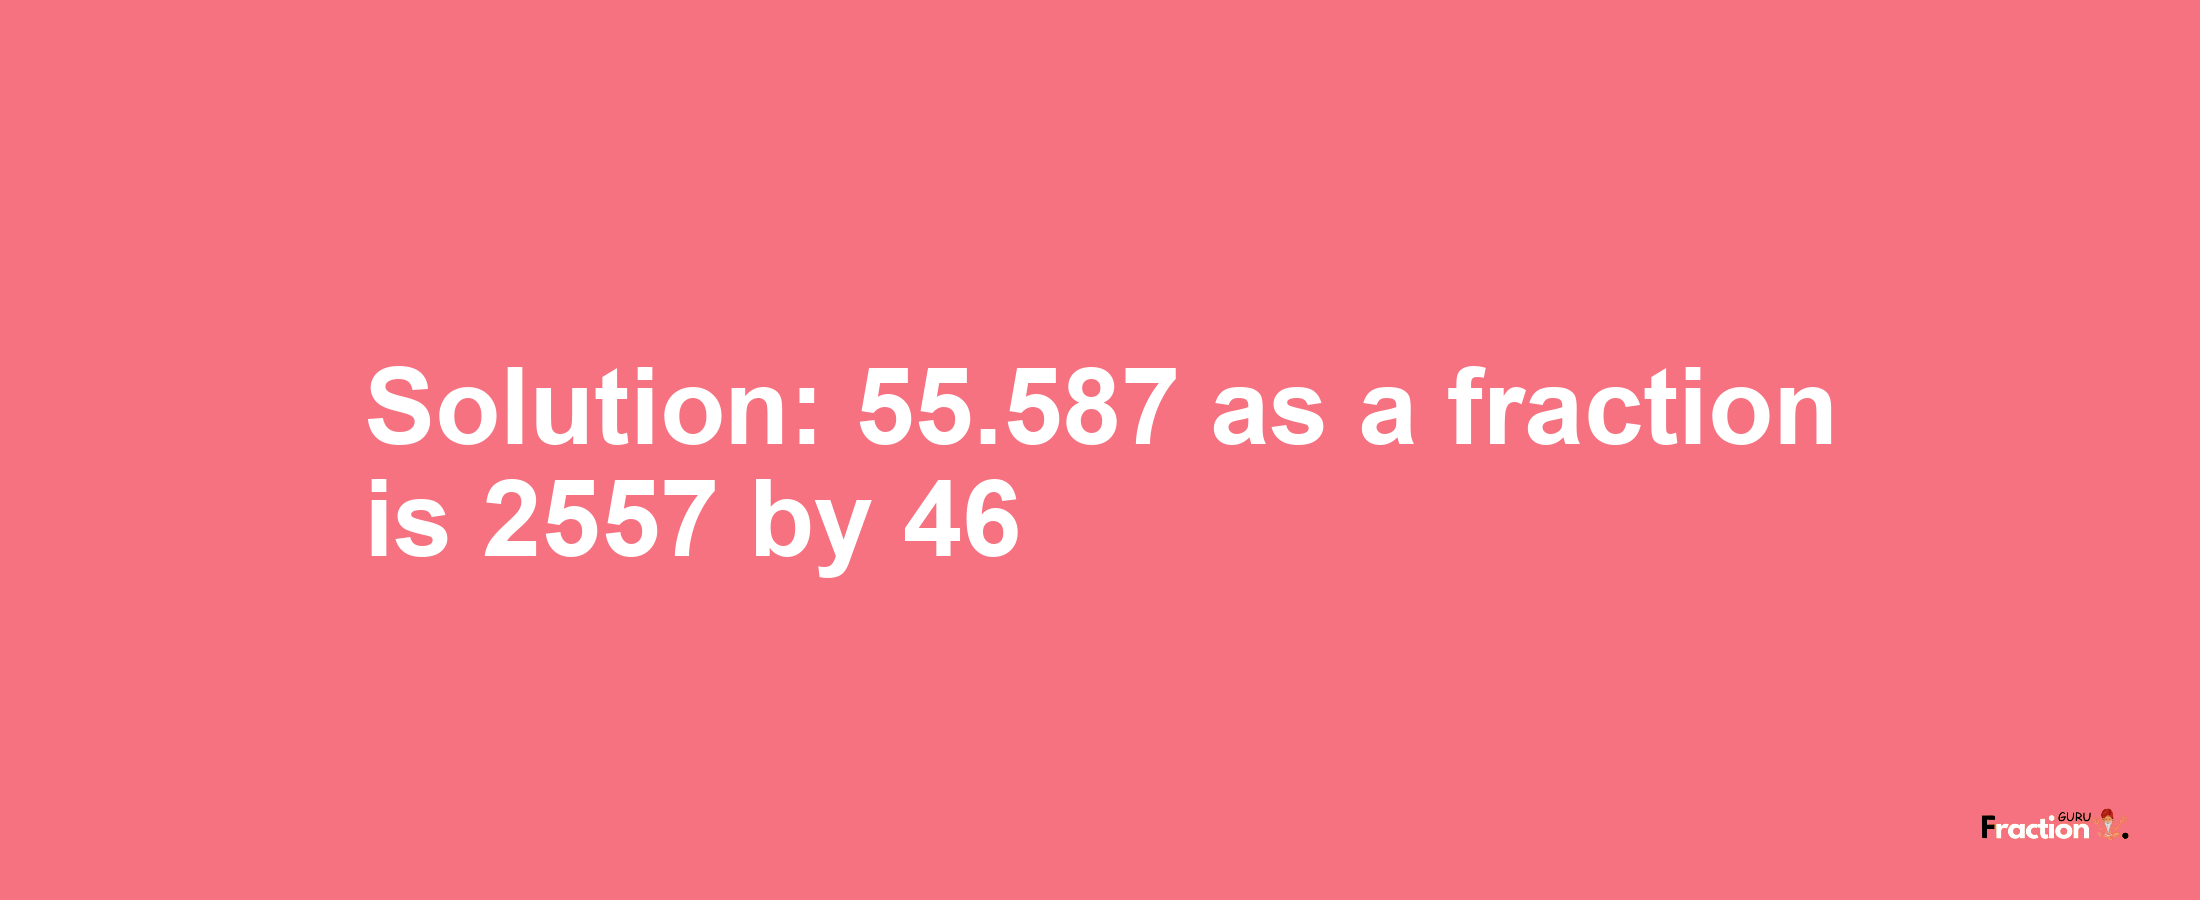 Solution:55.587 as a fraction is 2557/46